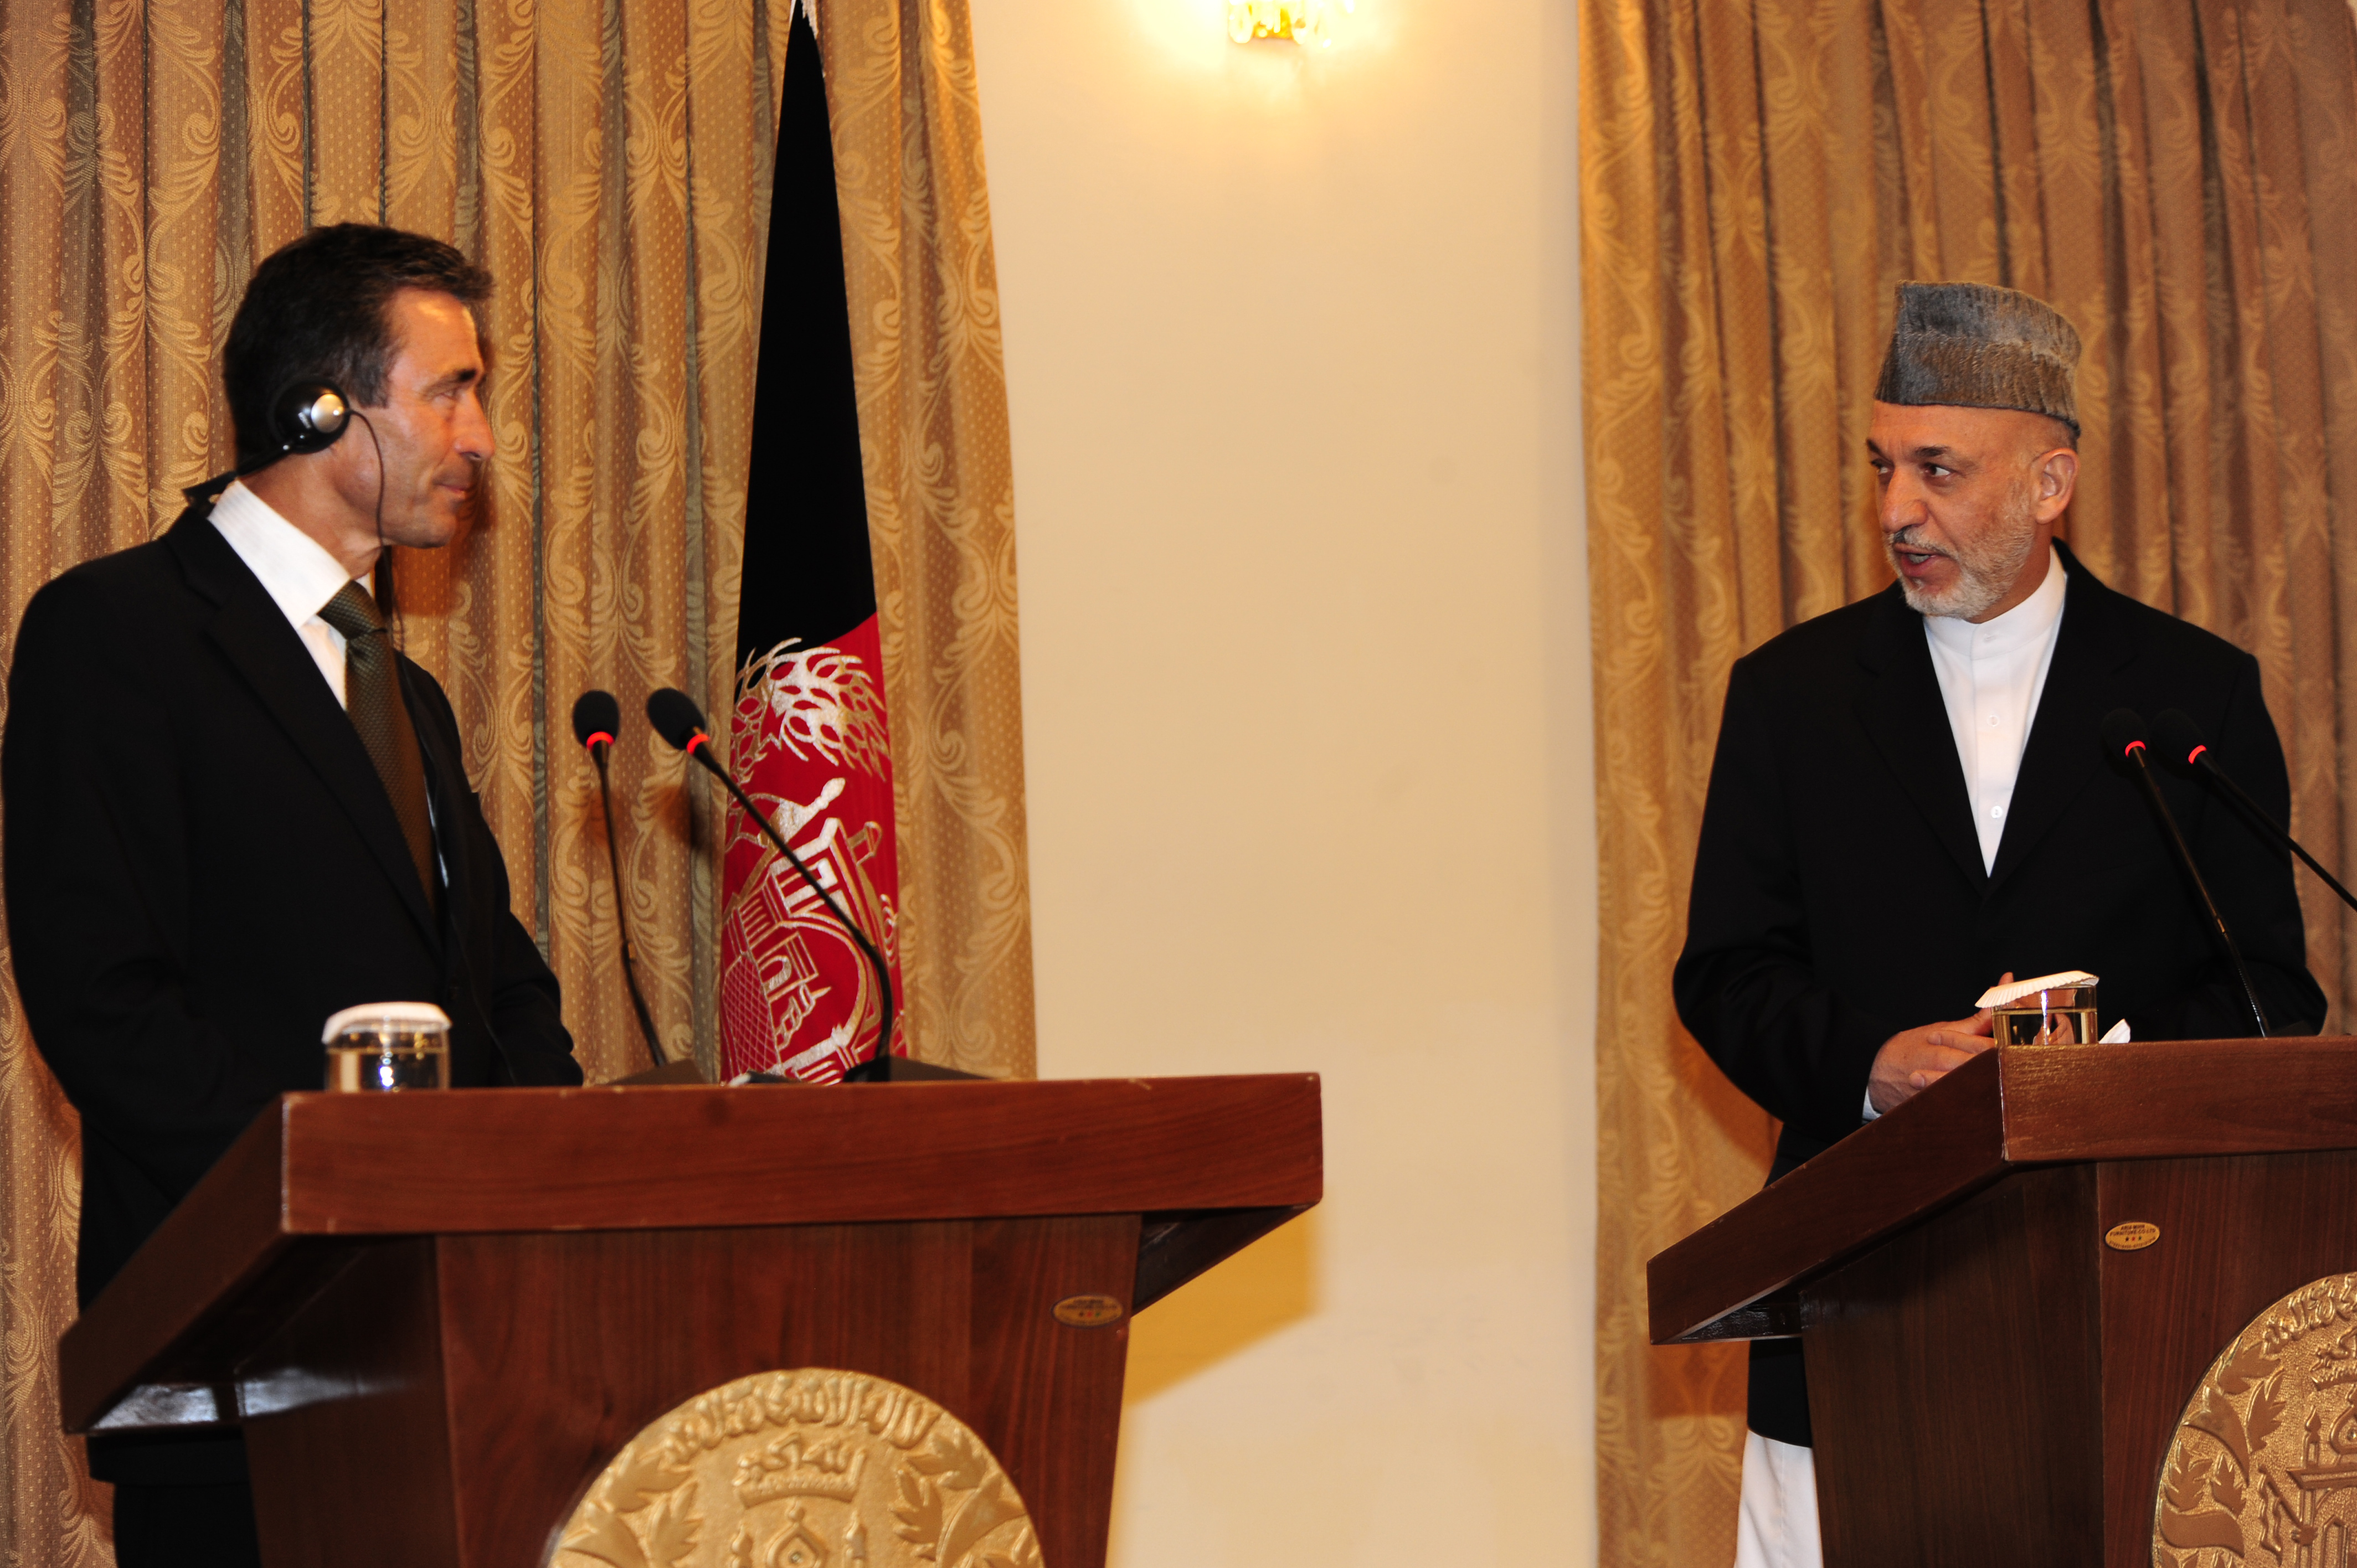 Anders Fogh Rasmussen and Hamid Karzai in 2009